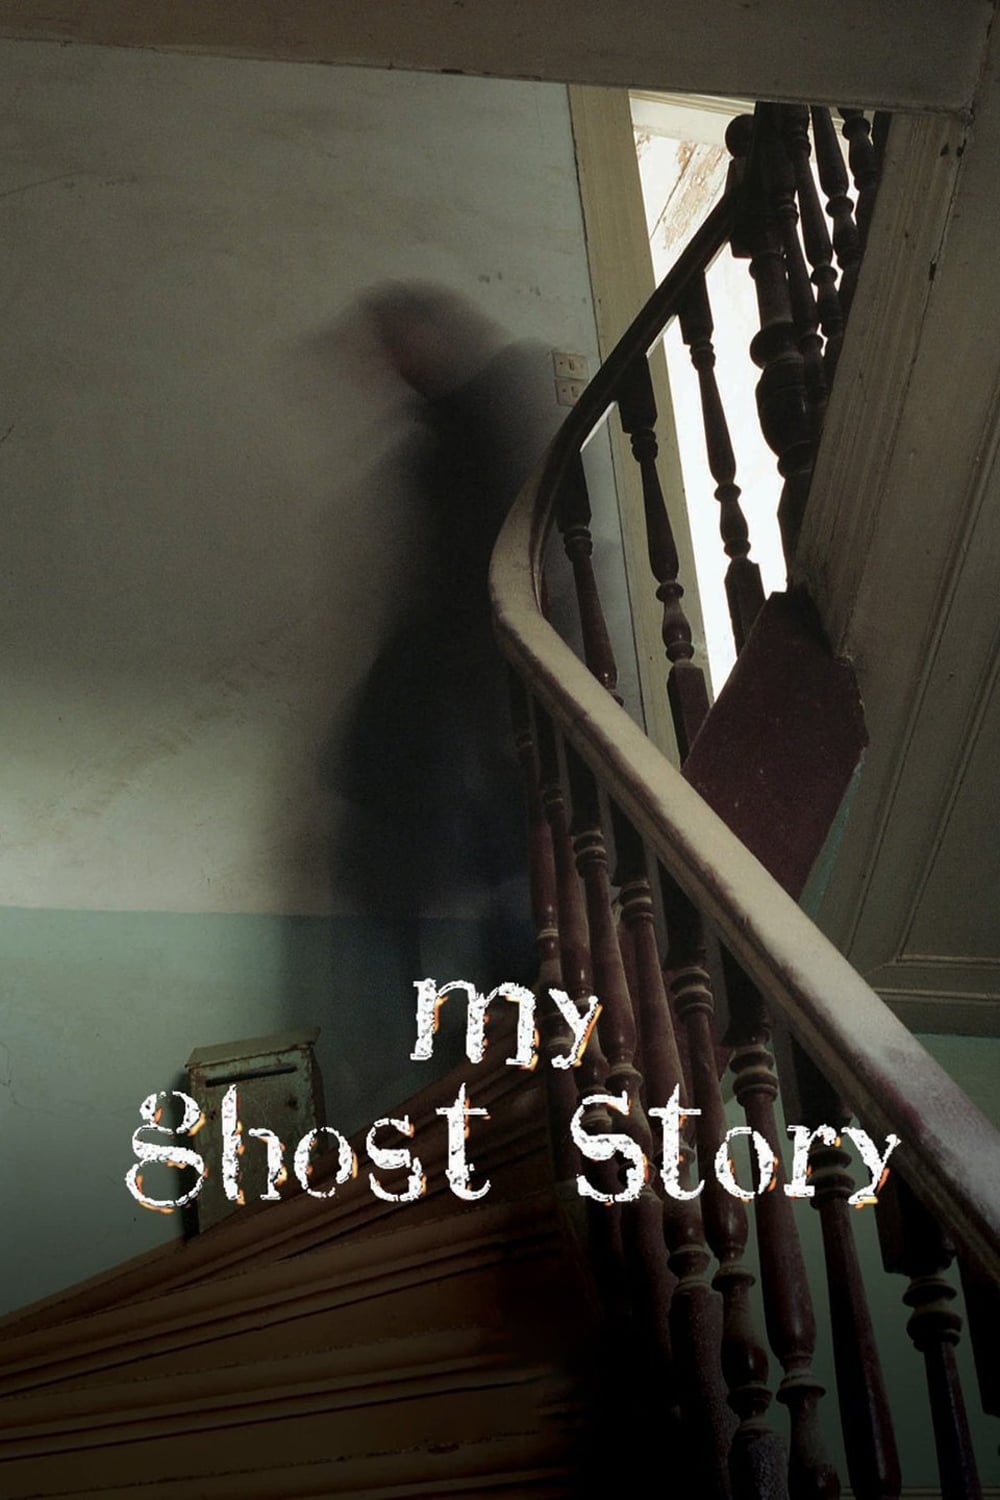 My Ghost Story